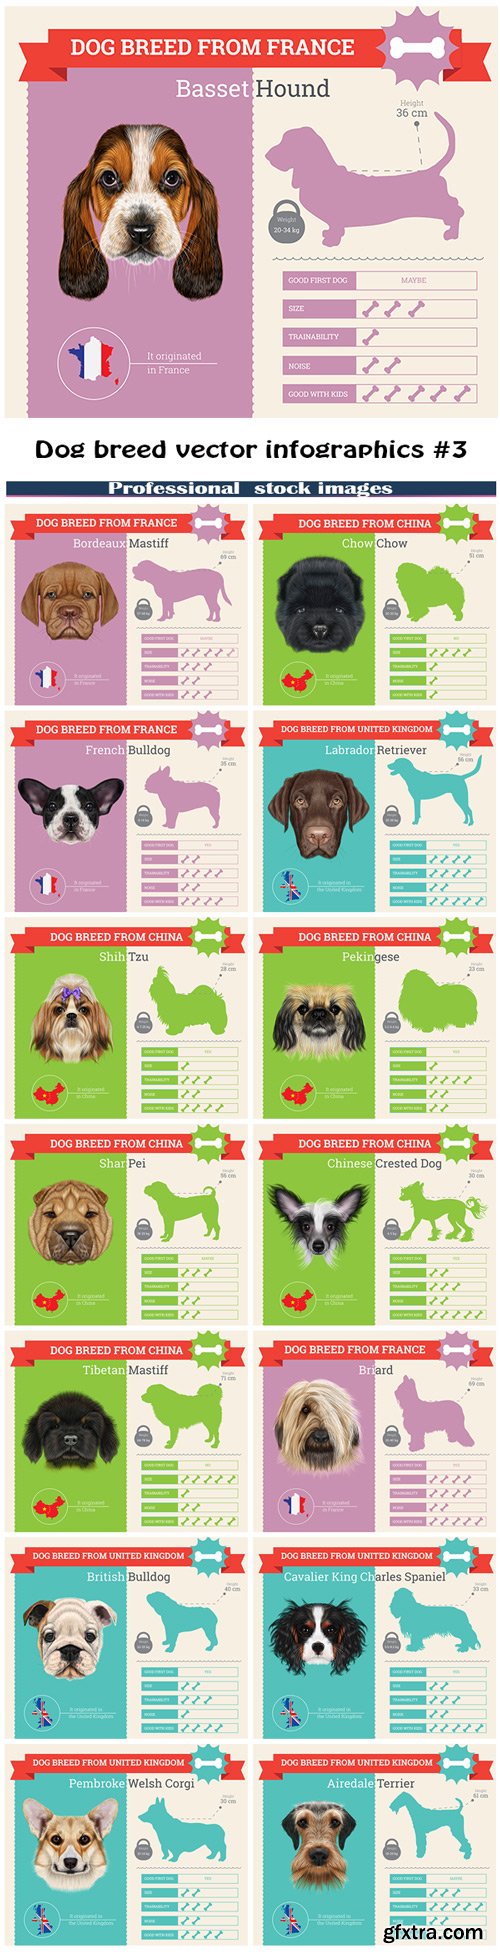 Dog breed vector infographics #3